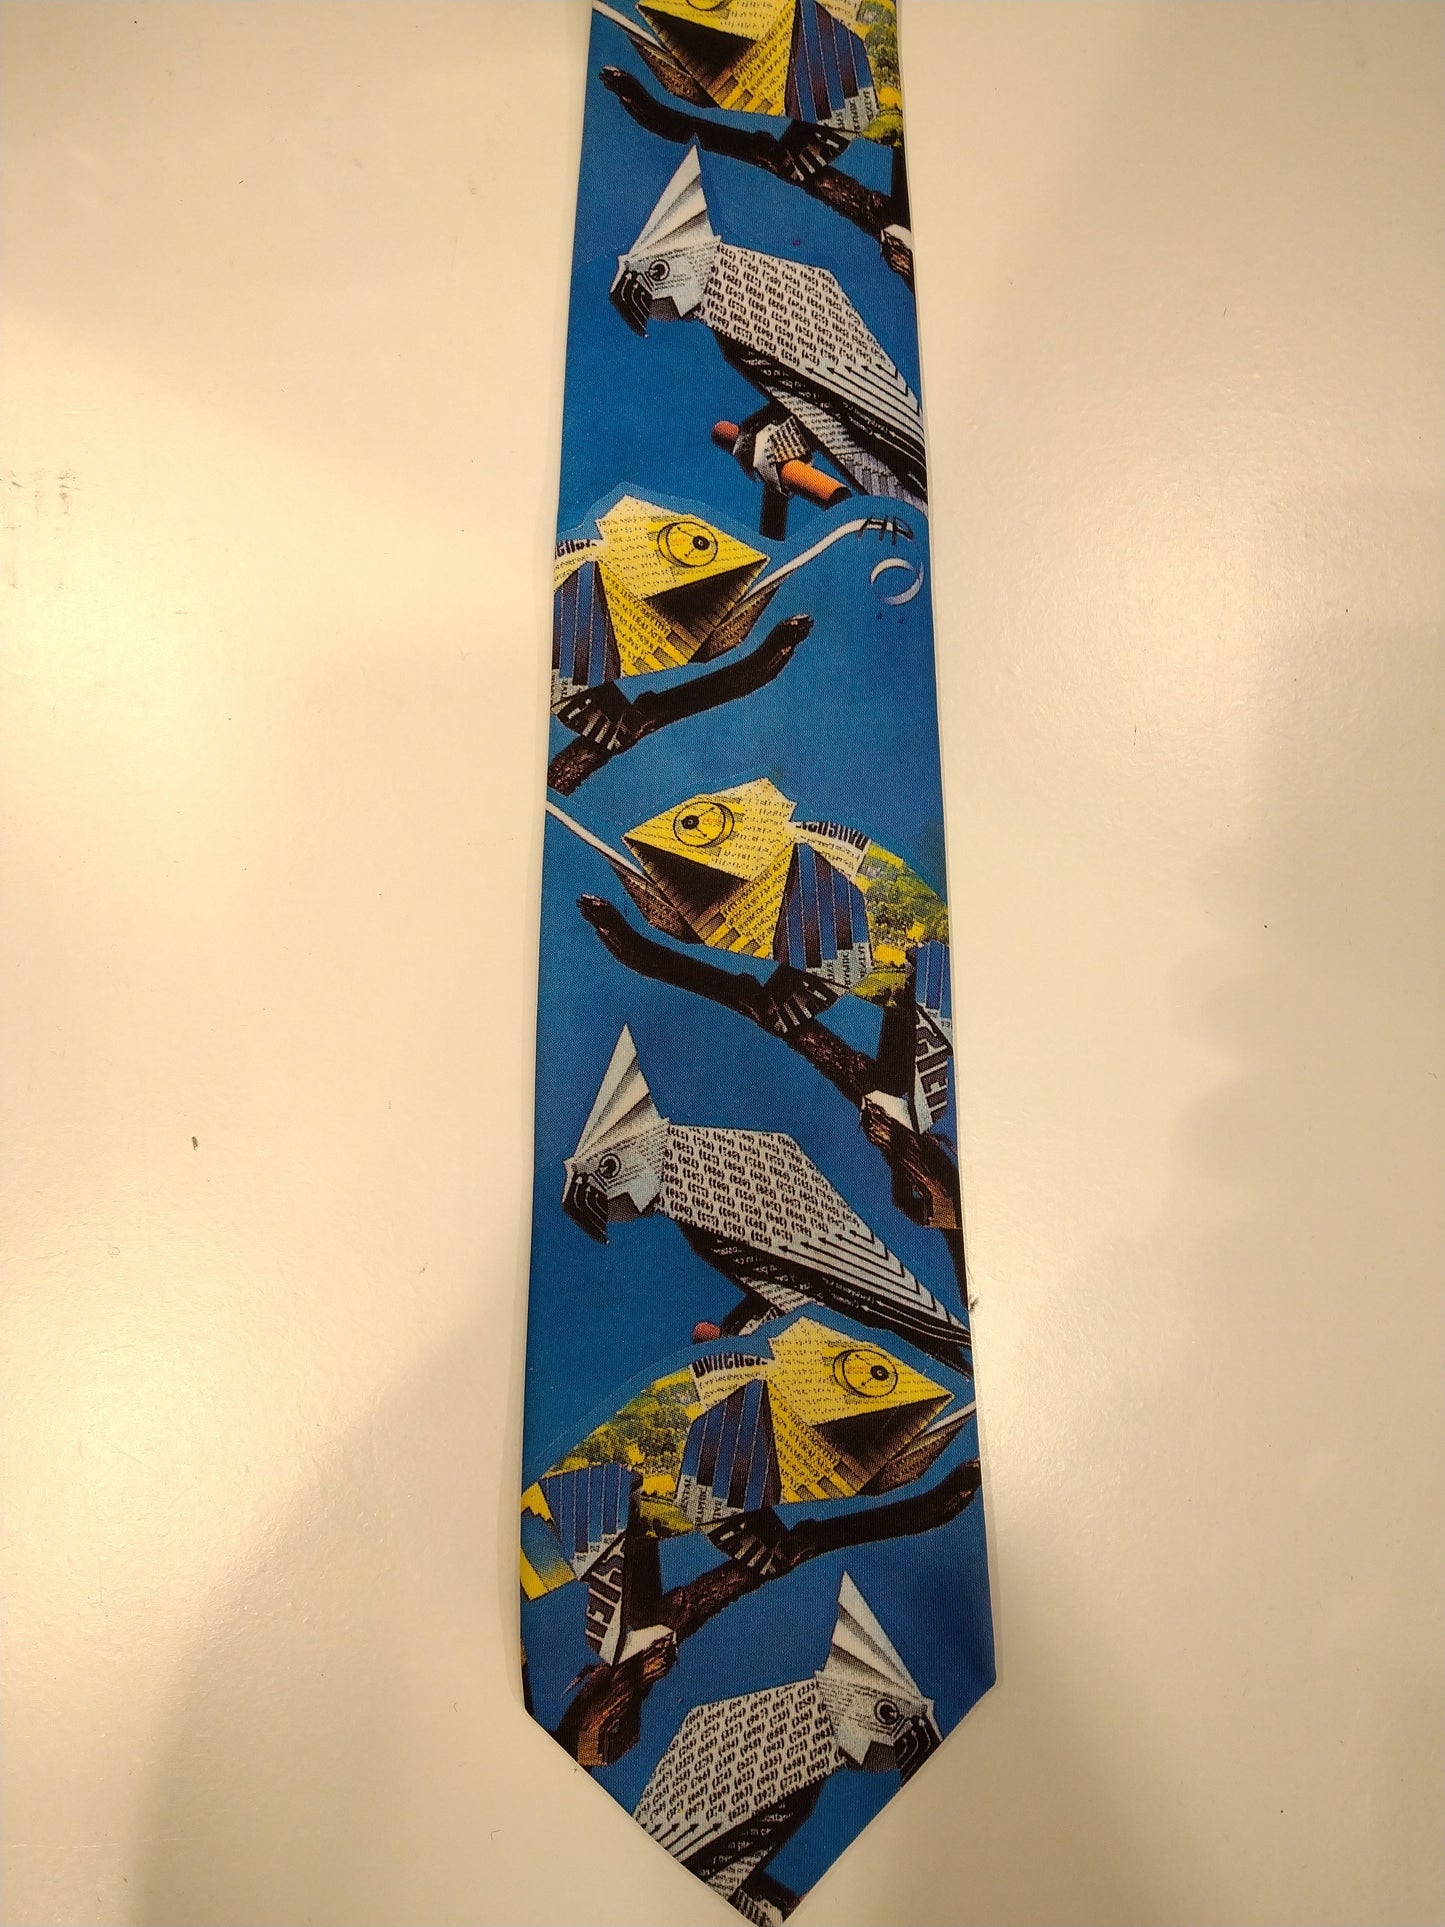 Vintage Rooymans Specials tie. Blue with chameleon / parrot motif.